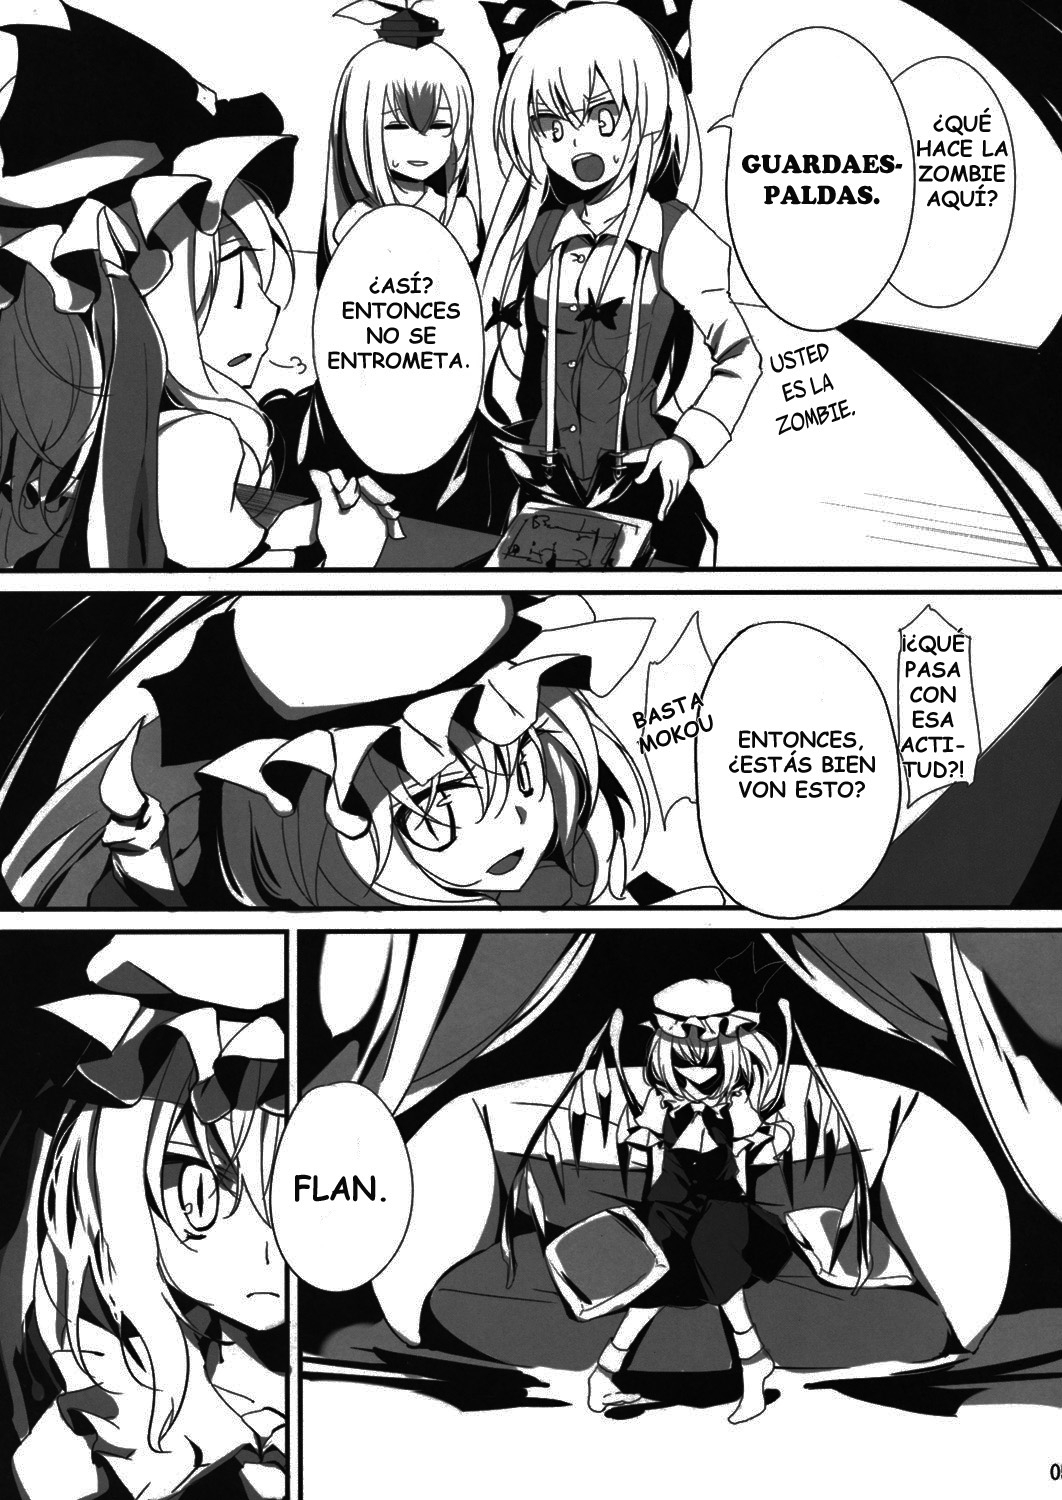 (C76) [Usotsukiya, Oppore-Coppore (BeLL, Oouso)] Flandre Student (Touhou Project) [Spanish] 4